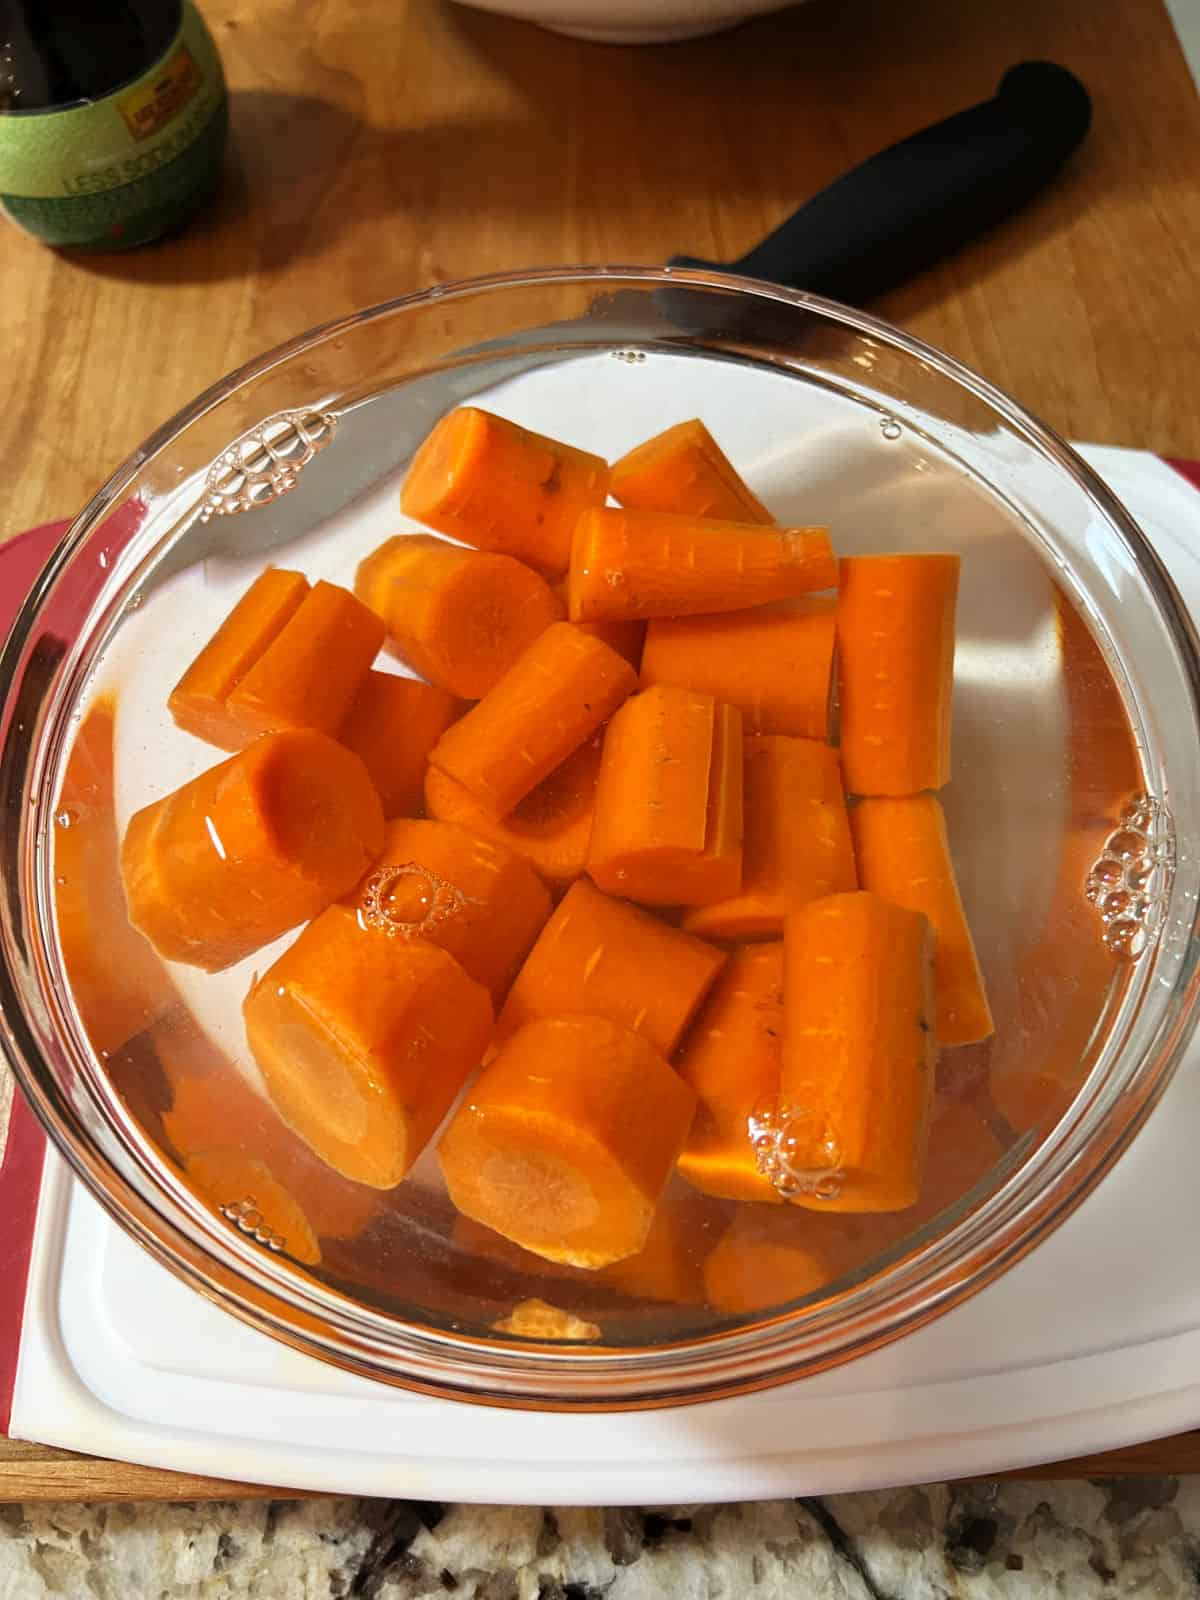 bowl of carrots immersed in water.